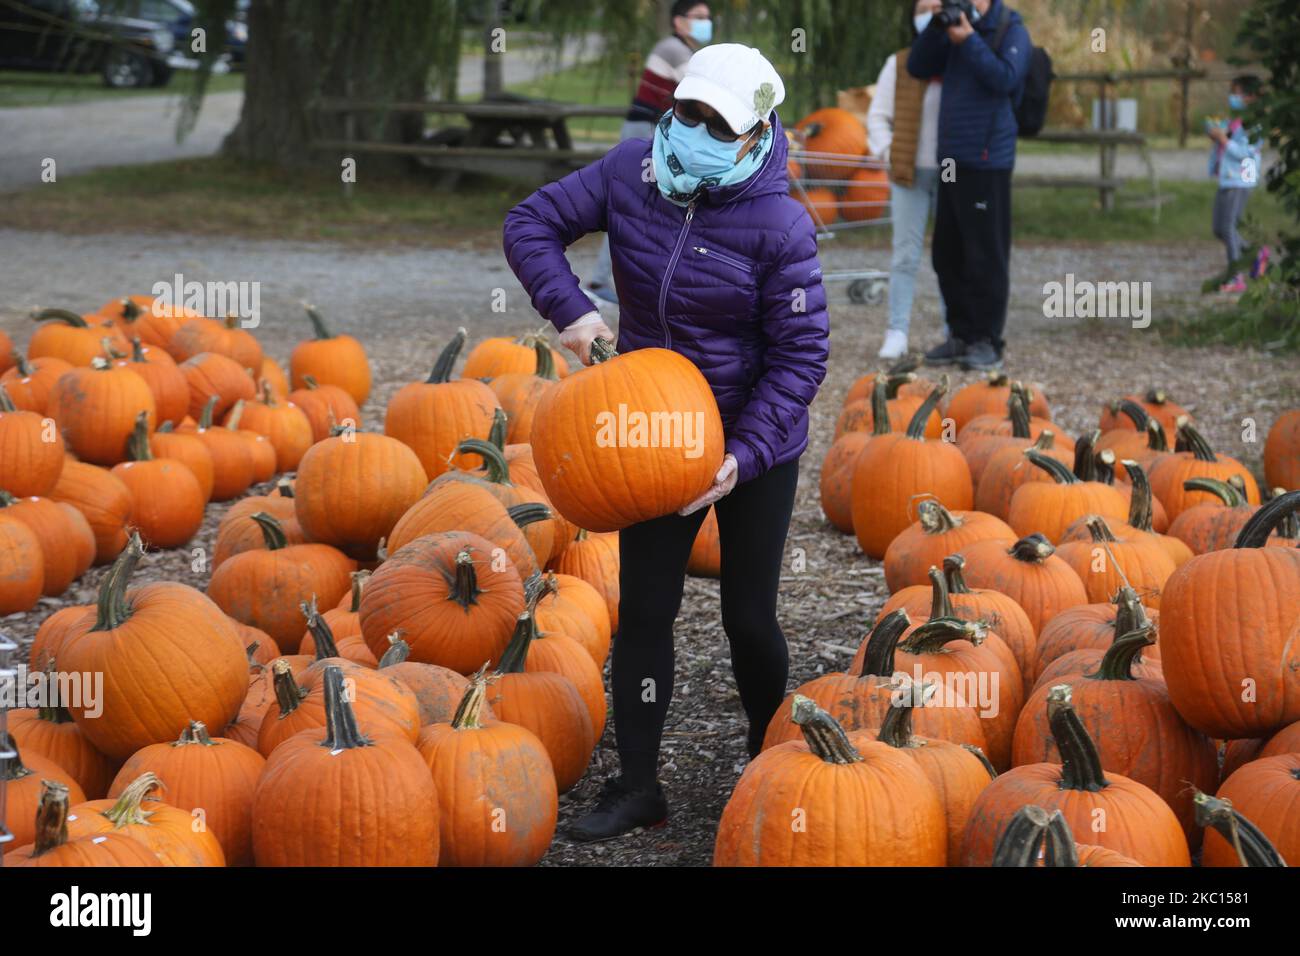 People wearing face masks to protect them from the novel coronavirus (COVID-19) while selecting pumpkins for Thanksgiving and Halloween at a farm in Markham, Ontario, Canada, on October 03, 2020. Cases of COVID-19 continue to rise, with record daily numbers across the Greater Toronto Area. Calls to place the city of Toronto back into lockdown to slow the spread of the virus are mounting from healthcare officials. (Photo by Creative Touch Imaging Ltd./NurPhoto) Stock Photo